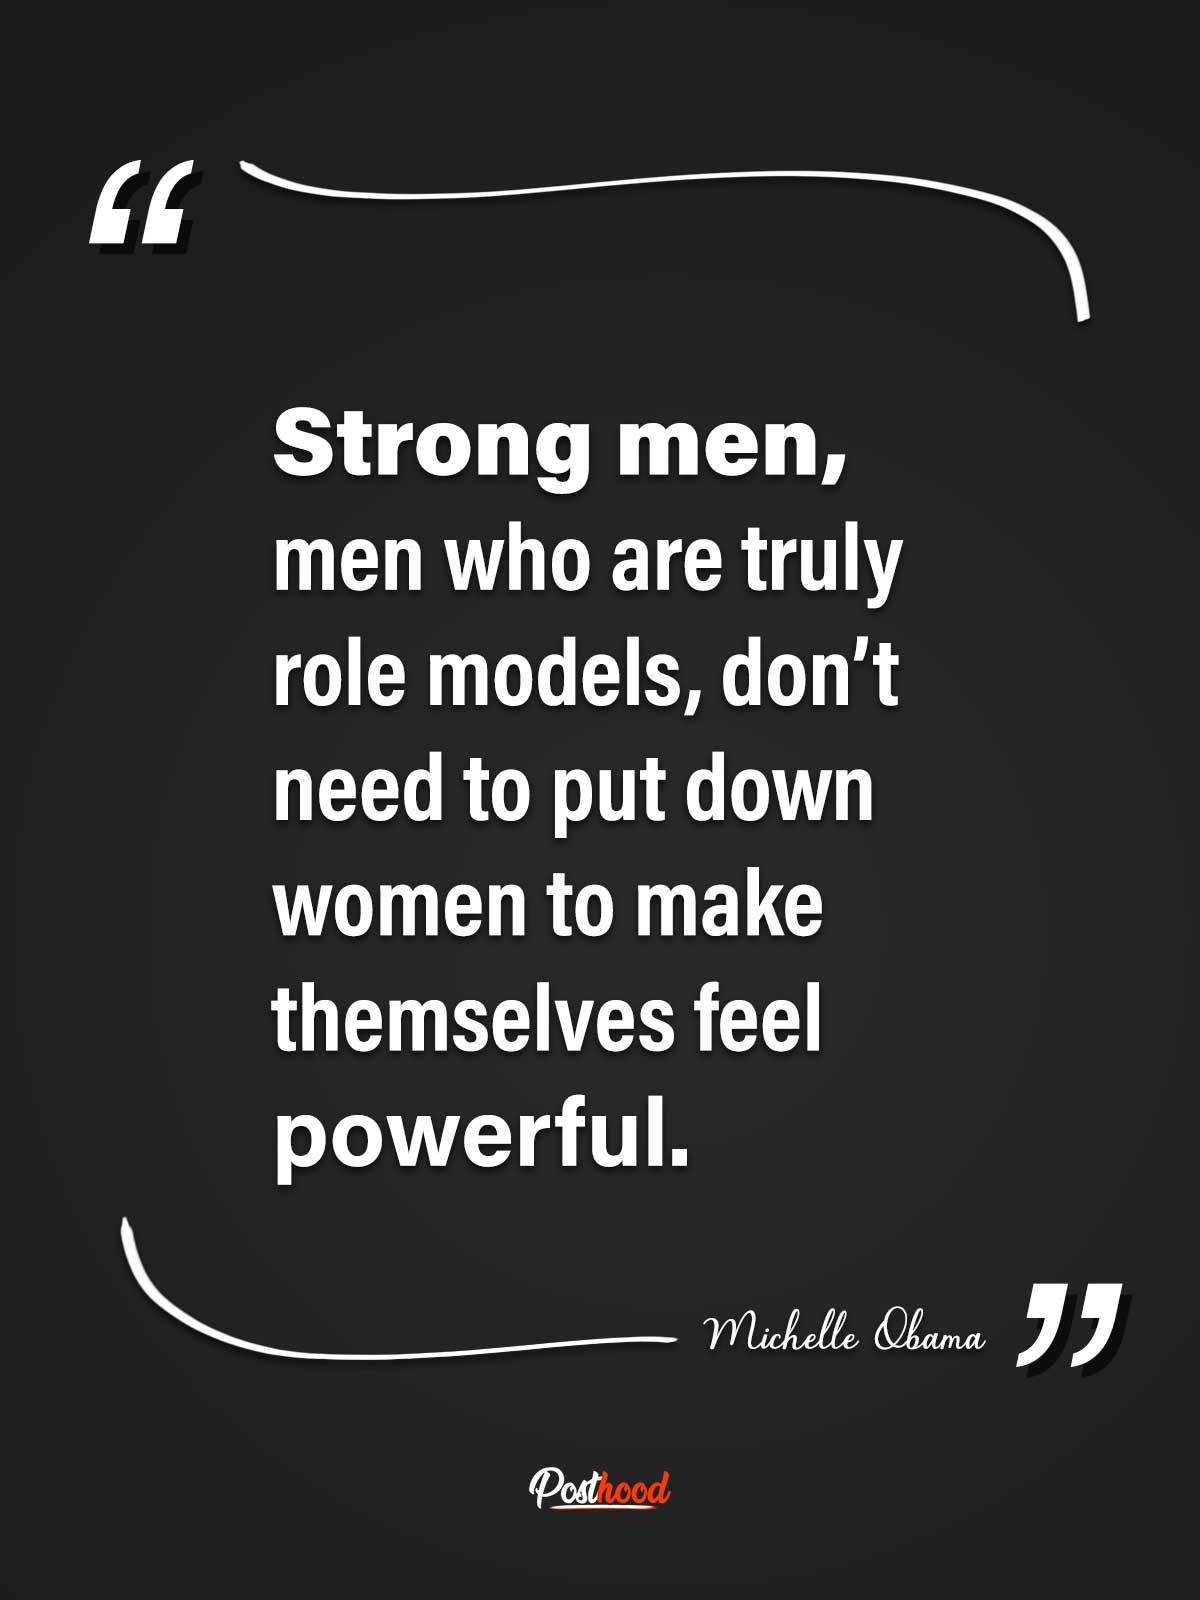 50 famous Michelle Obama quotes about feminism and women empowerment that you would love to read. Inspirational quotes to develop women entrepreneurship. 